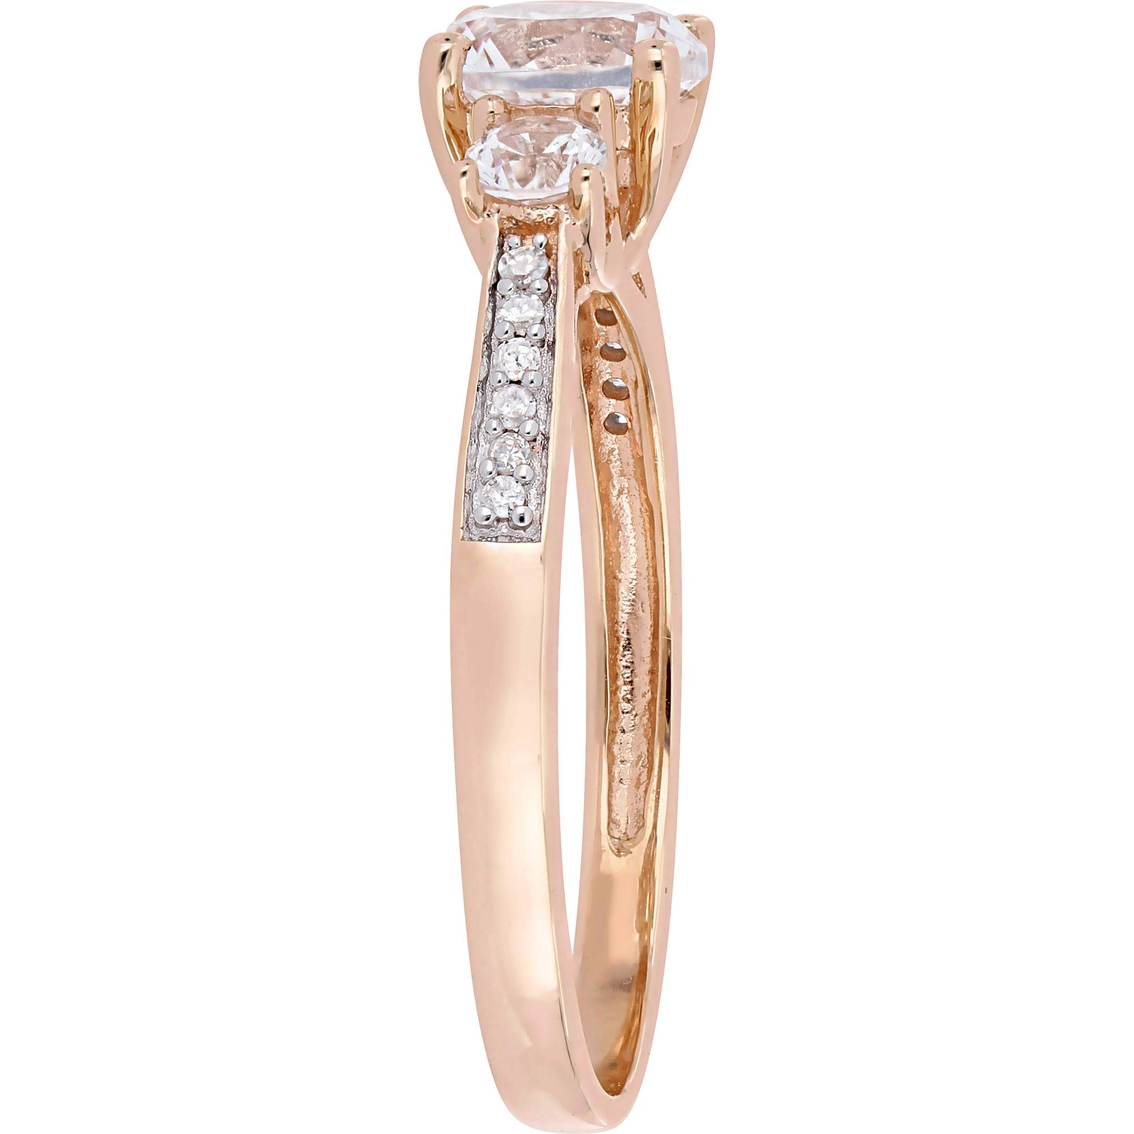 Sofia B. 10K Rose Gold Created White Sapphire and Diamond Accent 3 Stone Ring - Image 2 of 4